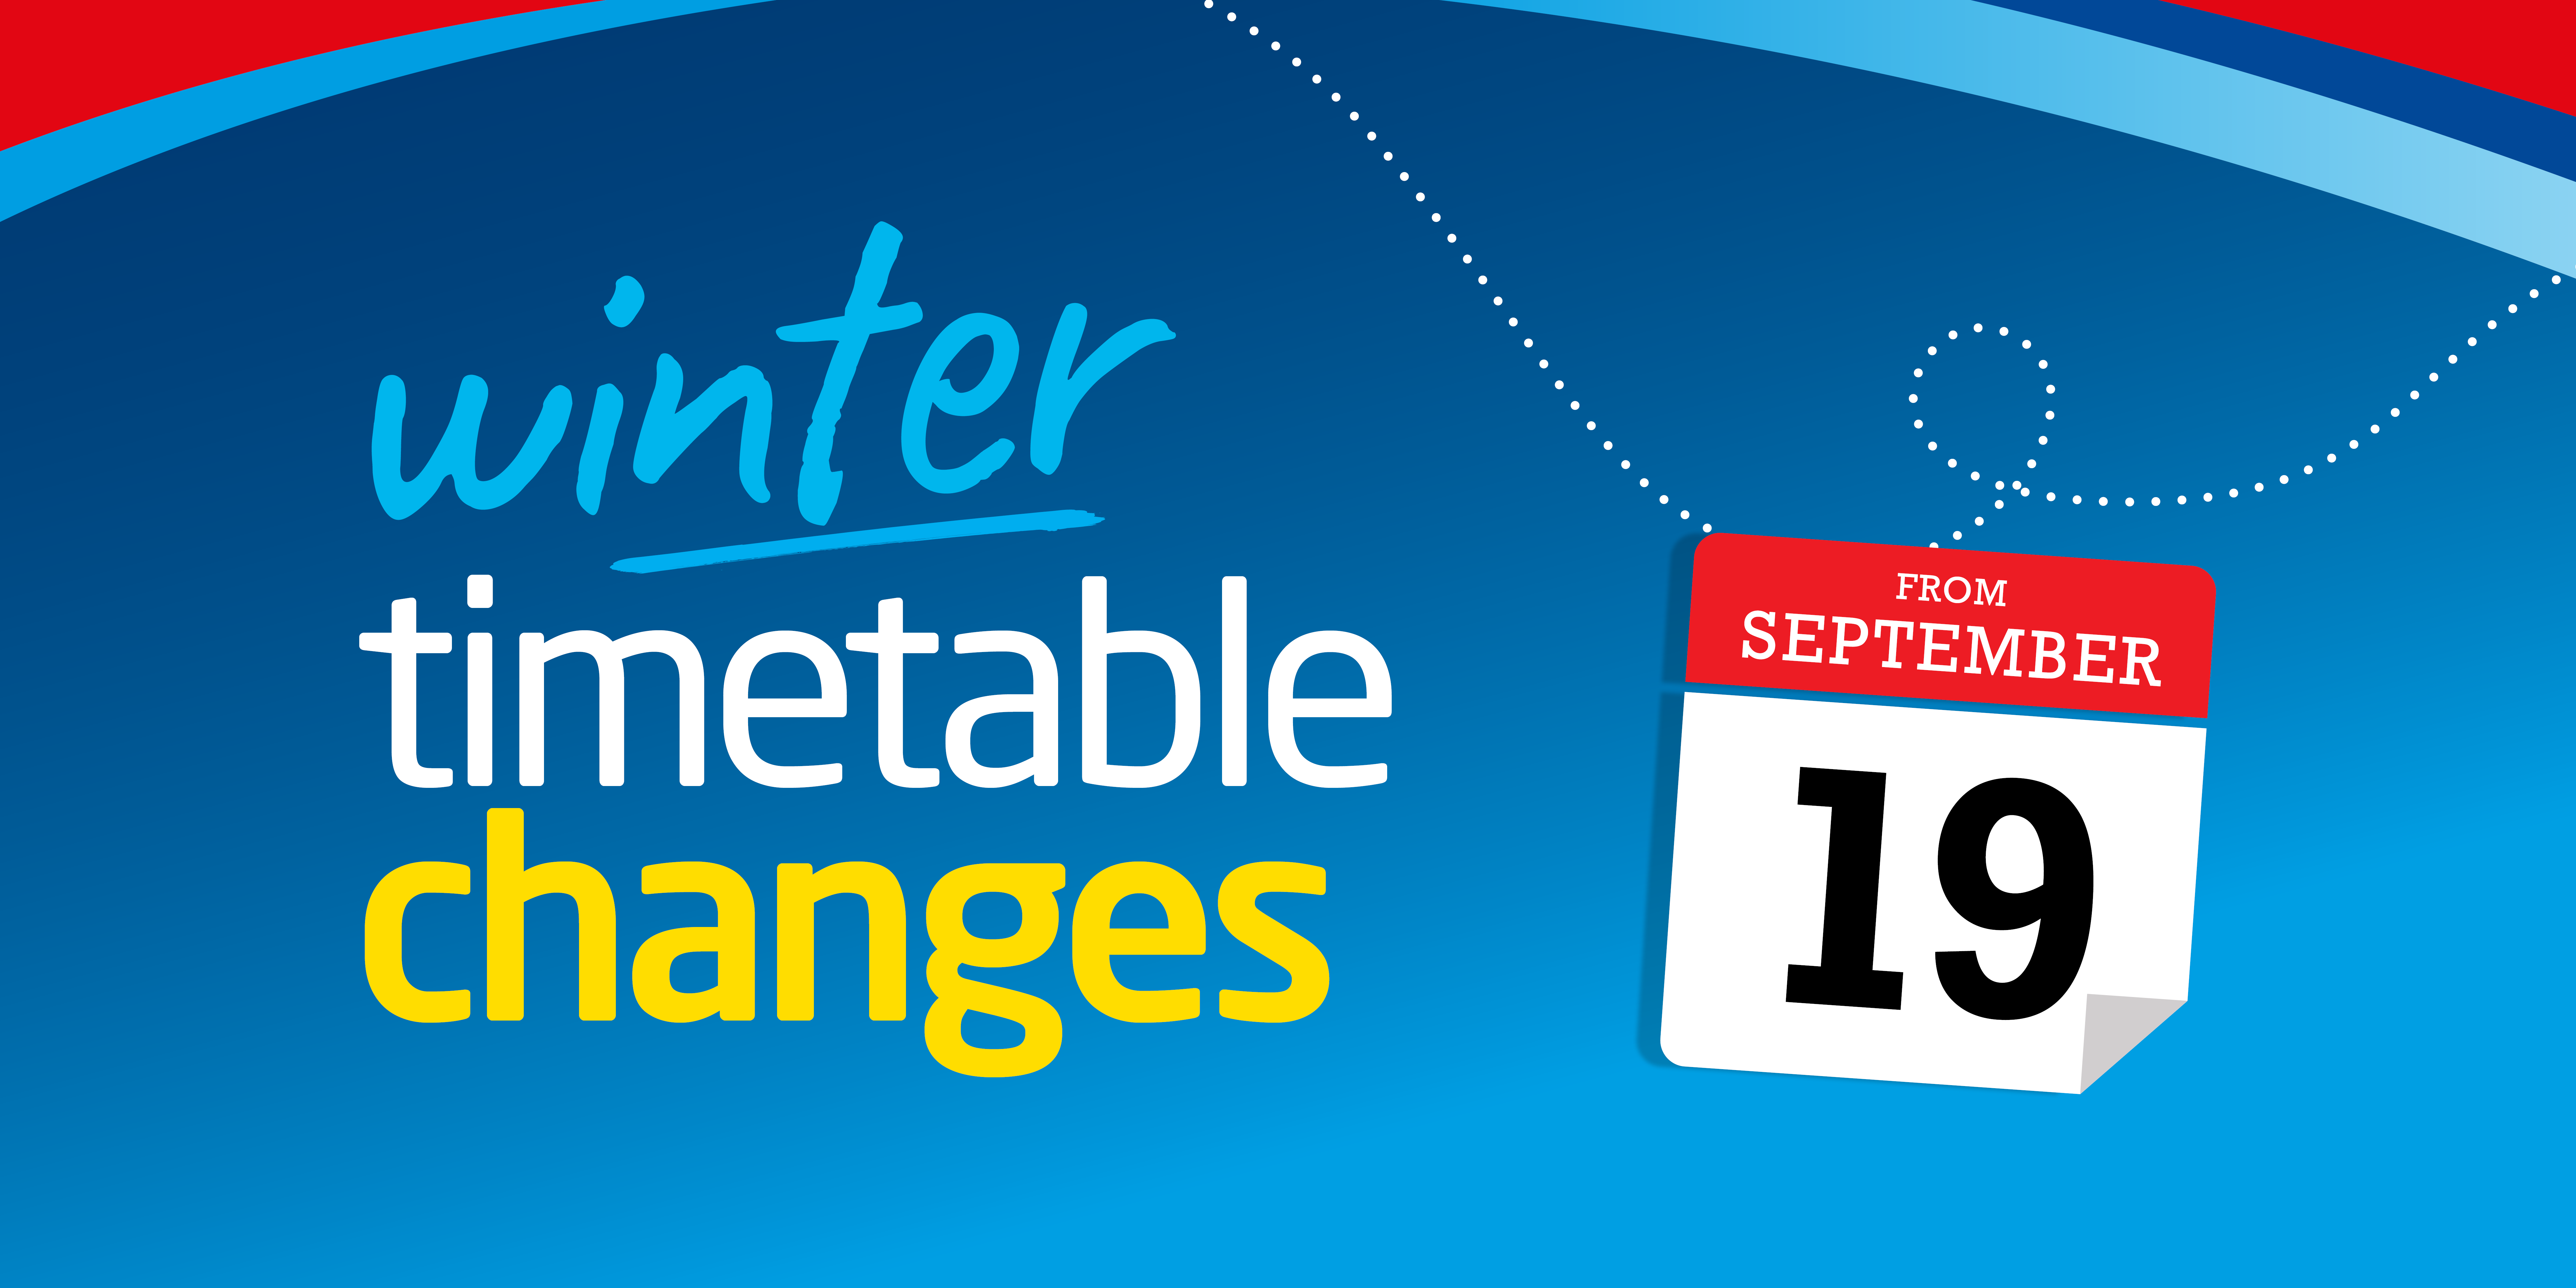 Winter timetable changes from 19th September